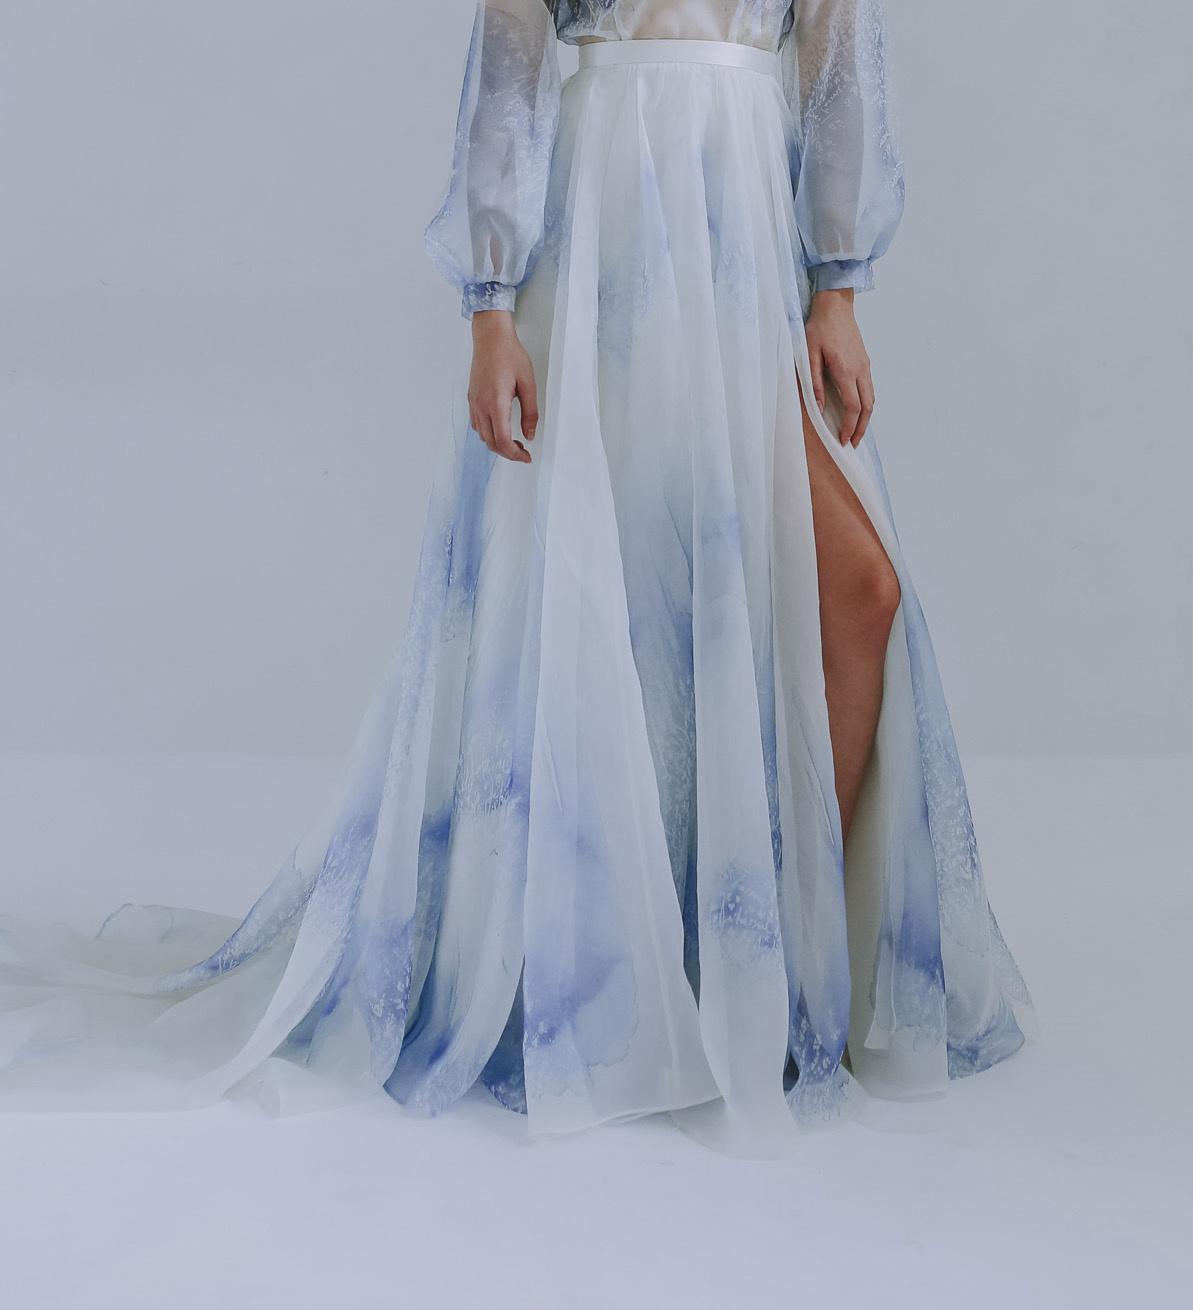 White woman wearing a flowing blue and white bridal skirt with a split and a sheer long sleeved blue and white blouse tucked in at the waistband